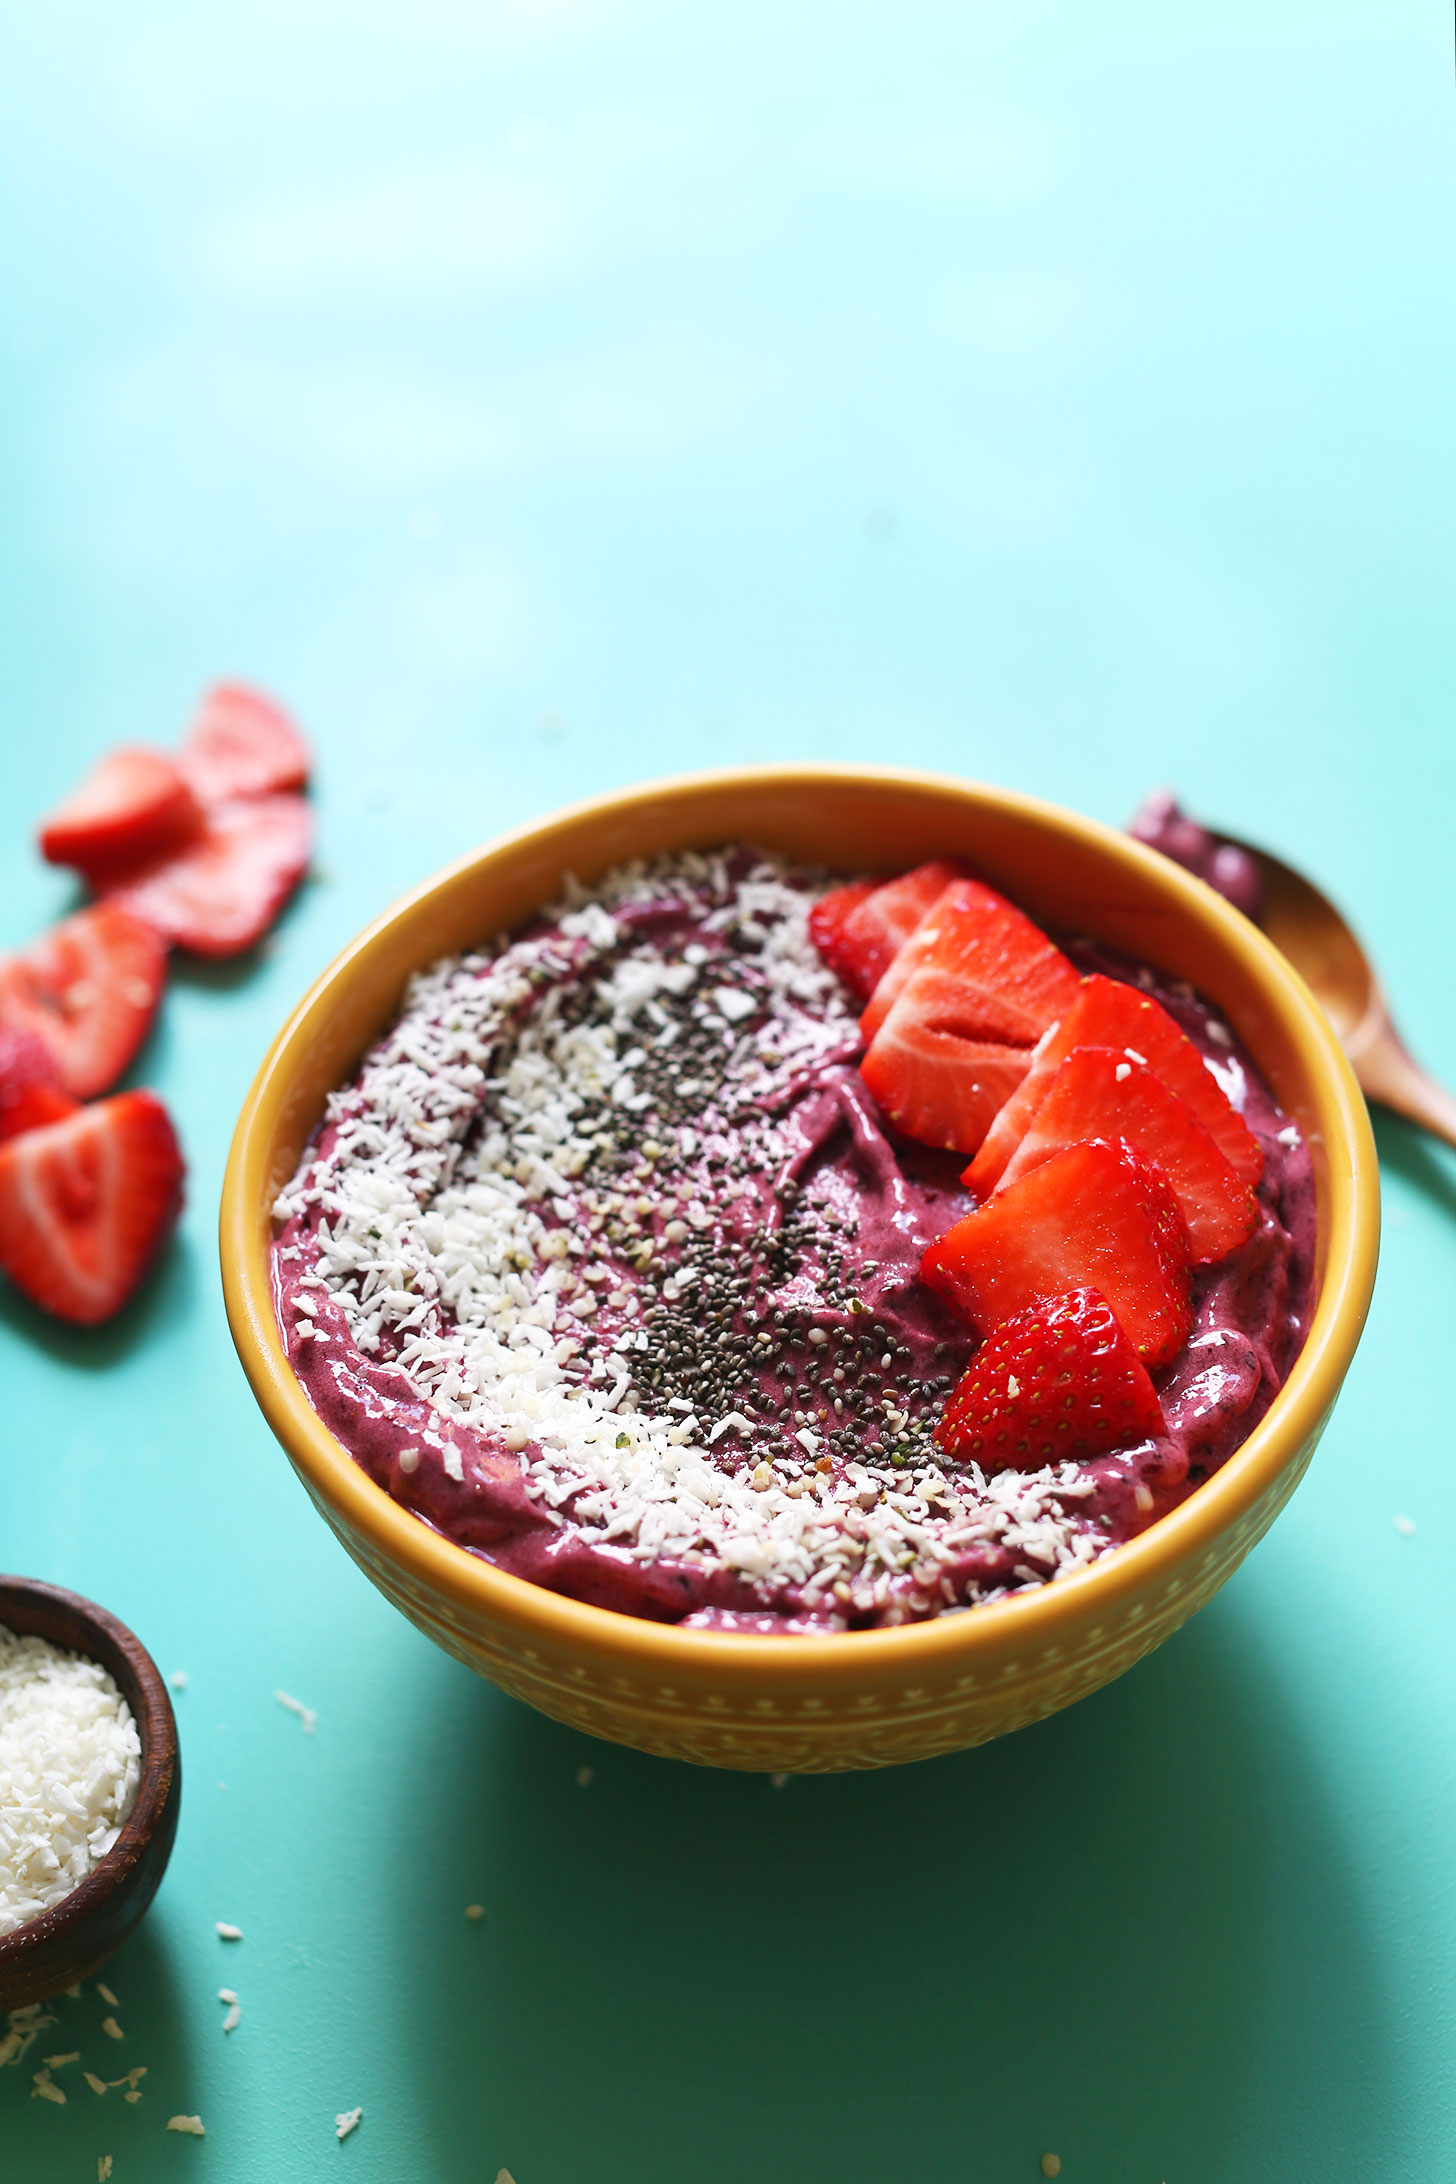 My Go To Smoothie Bowl 20 minutes